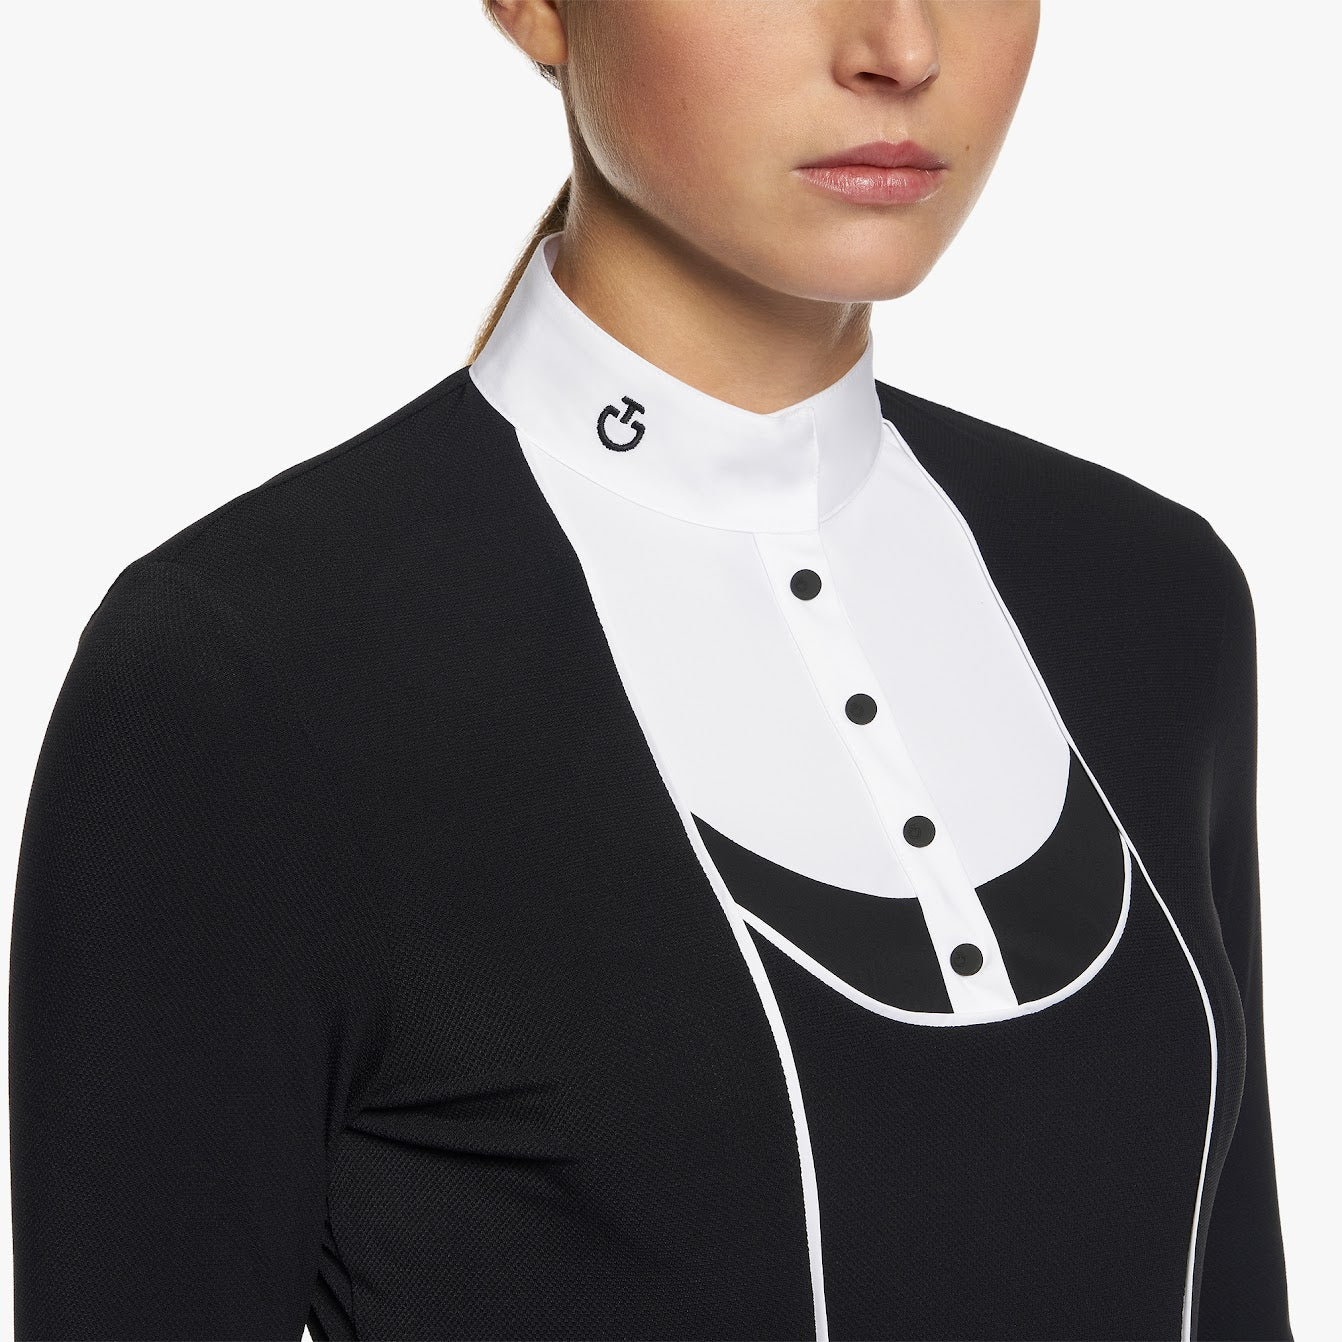 The Cavalleria Toscana Black Technical Pique Button show Shirt is stunning. The striking design uses contrast piping and a pique bib with matching covered buttons.  the CT shirt is made from breathable bi stretch technical jersey. 